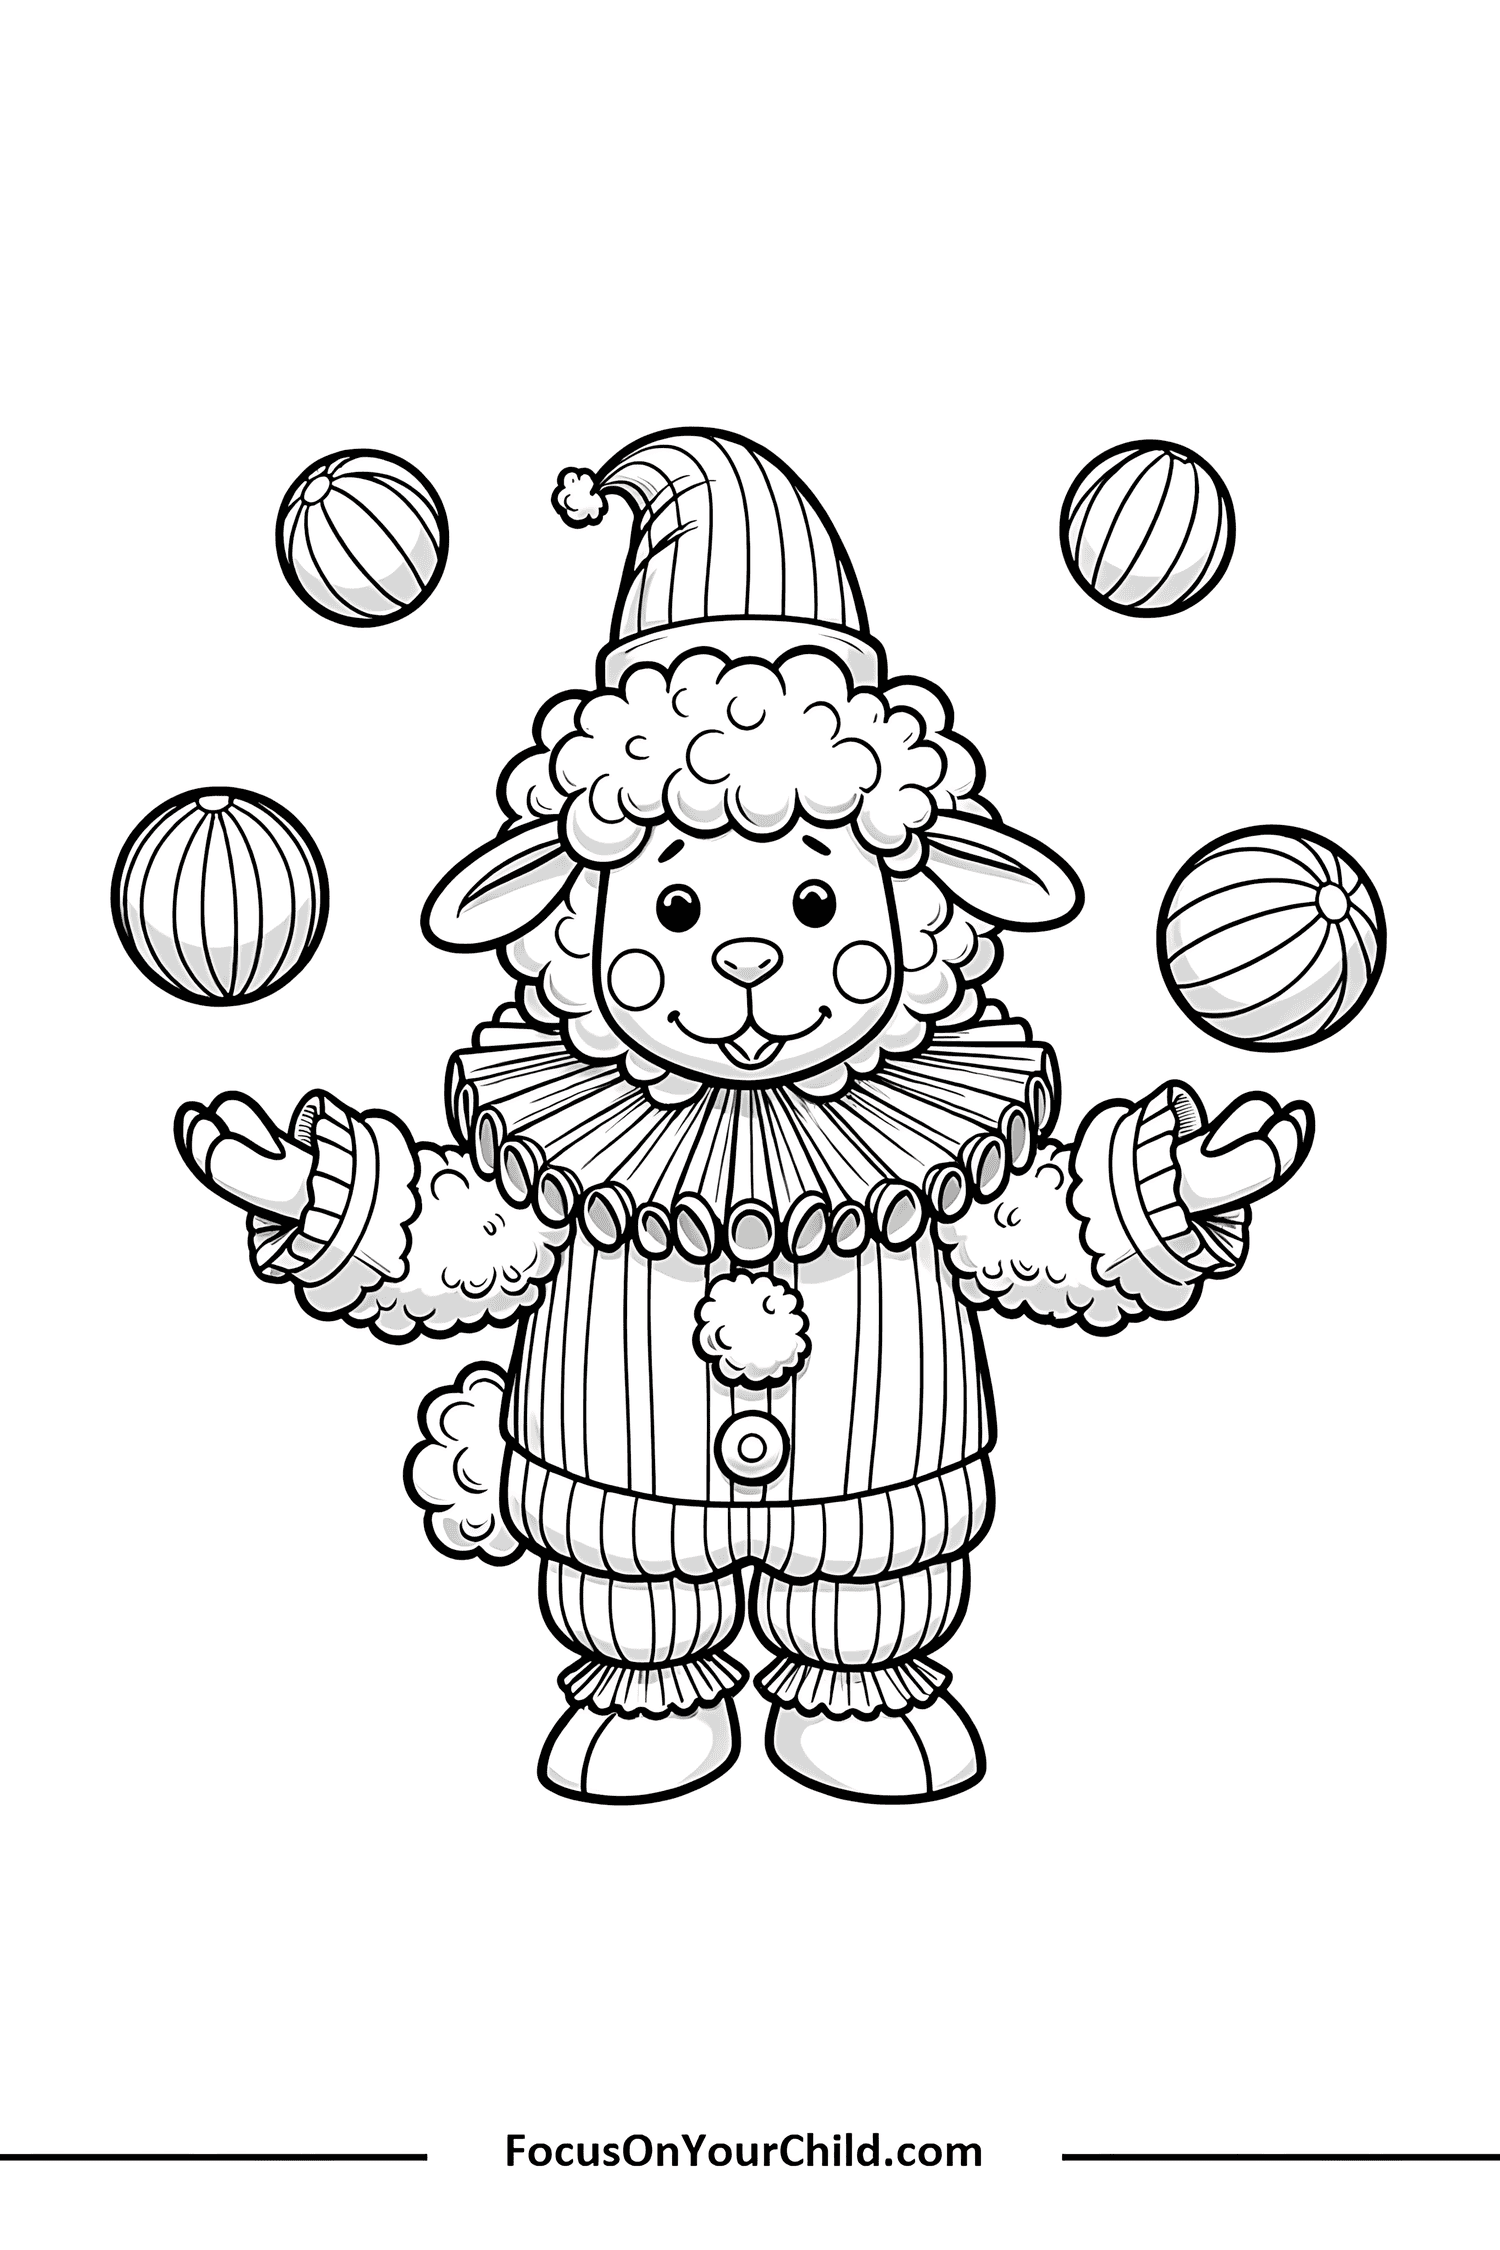 Adorable cartoon lamb dressed as a juggler in festive clown outfit.